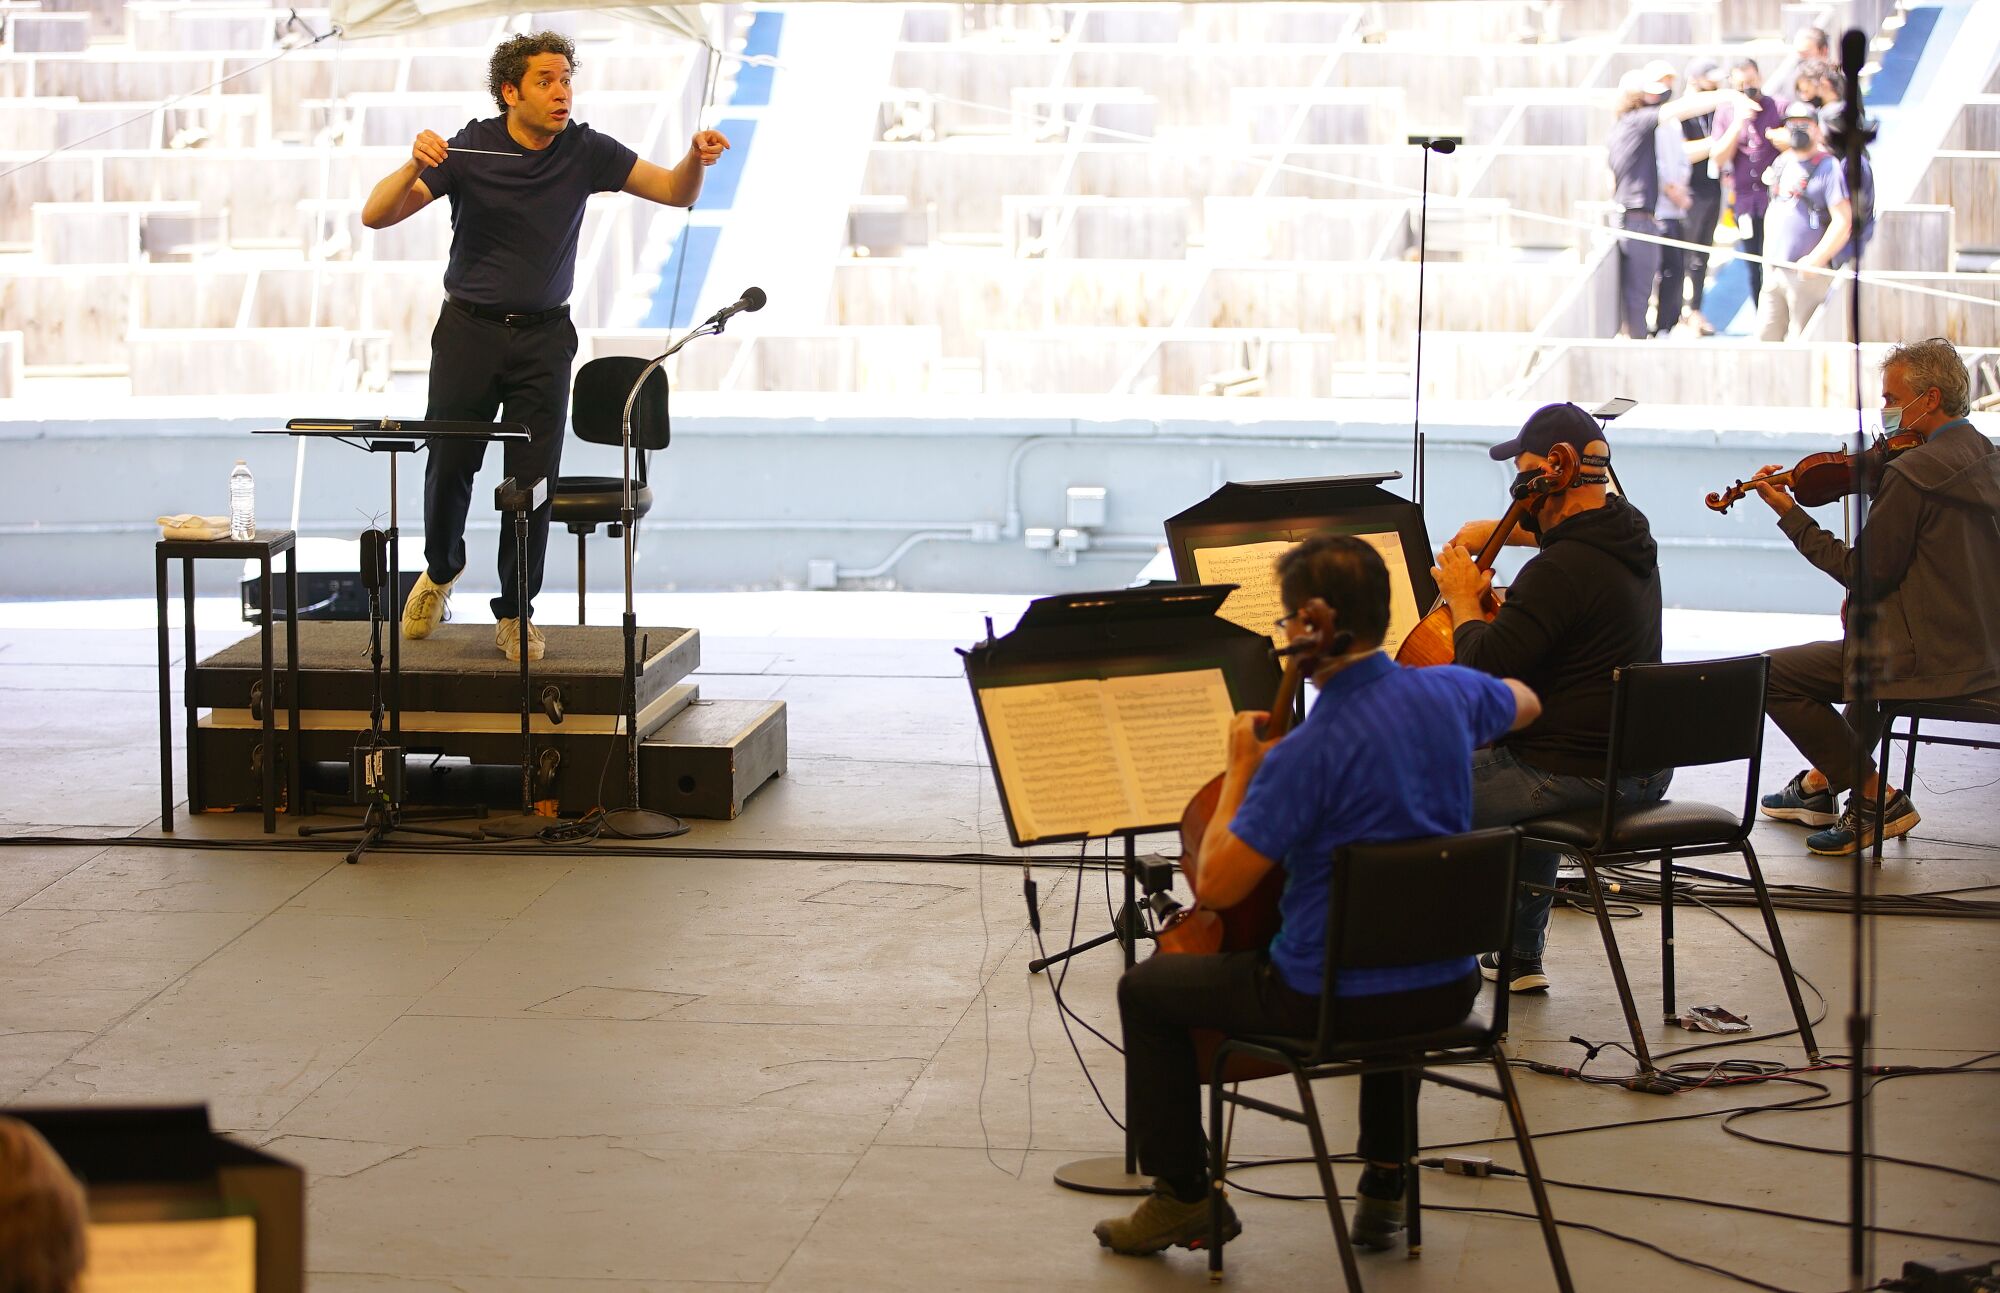 Dudamel holds up his hands as he conducts rehearsal